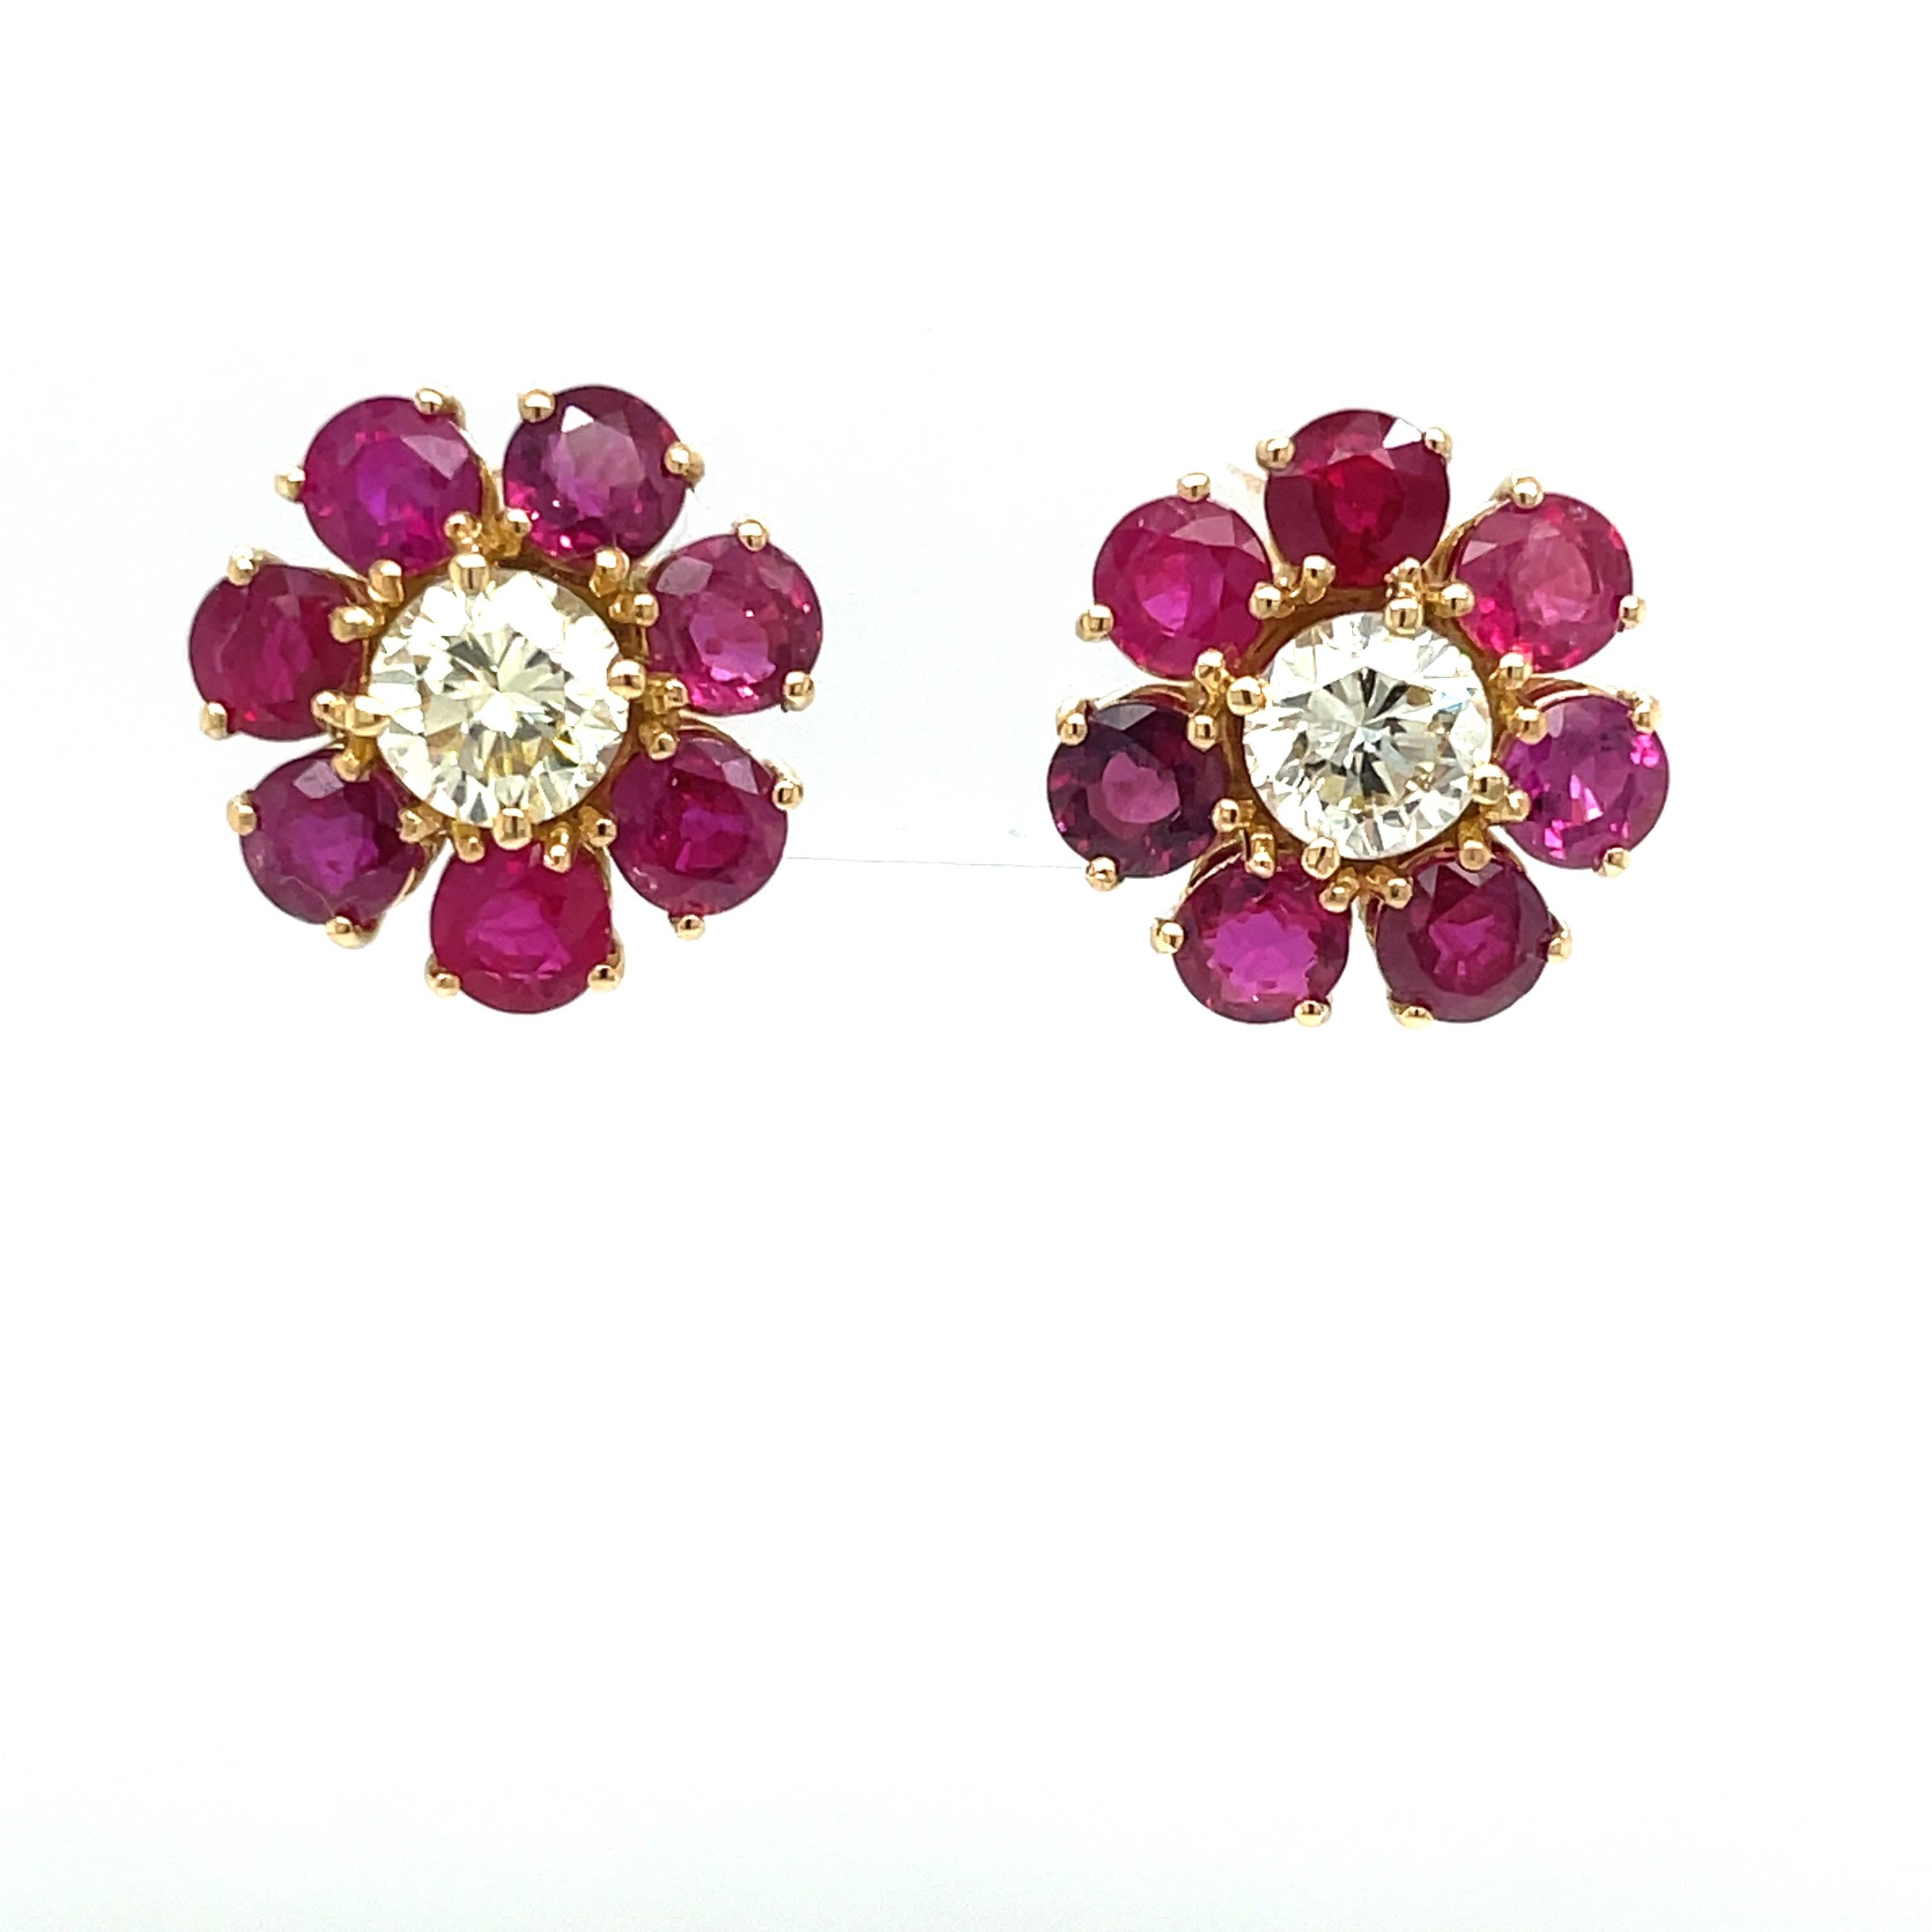 Pretty pair of vintage diamond cluster earrings set in solid 18k  Yellow Gold. They are set with Natural Ruby and with two large Round Old European cut Diamonds in the center graded clarity VS, light fancy.
Origin Italy 1950

CONDITION: Pre-owned -